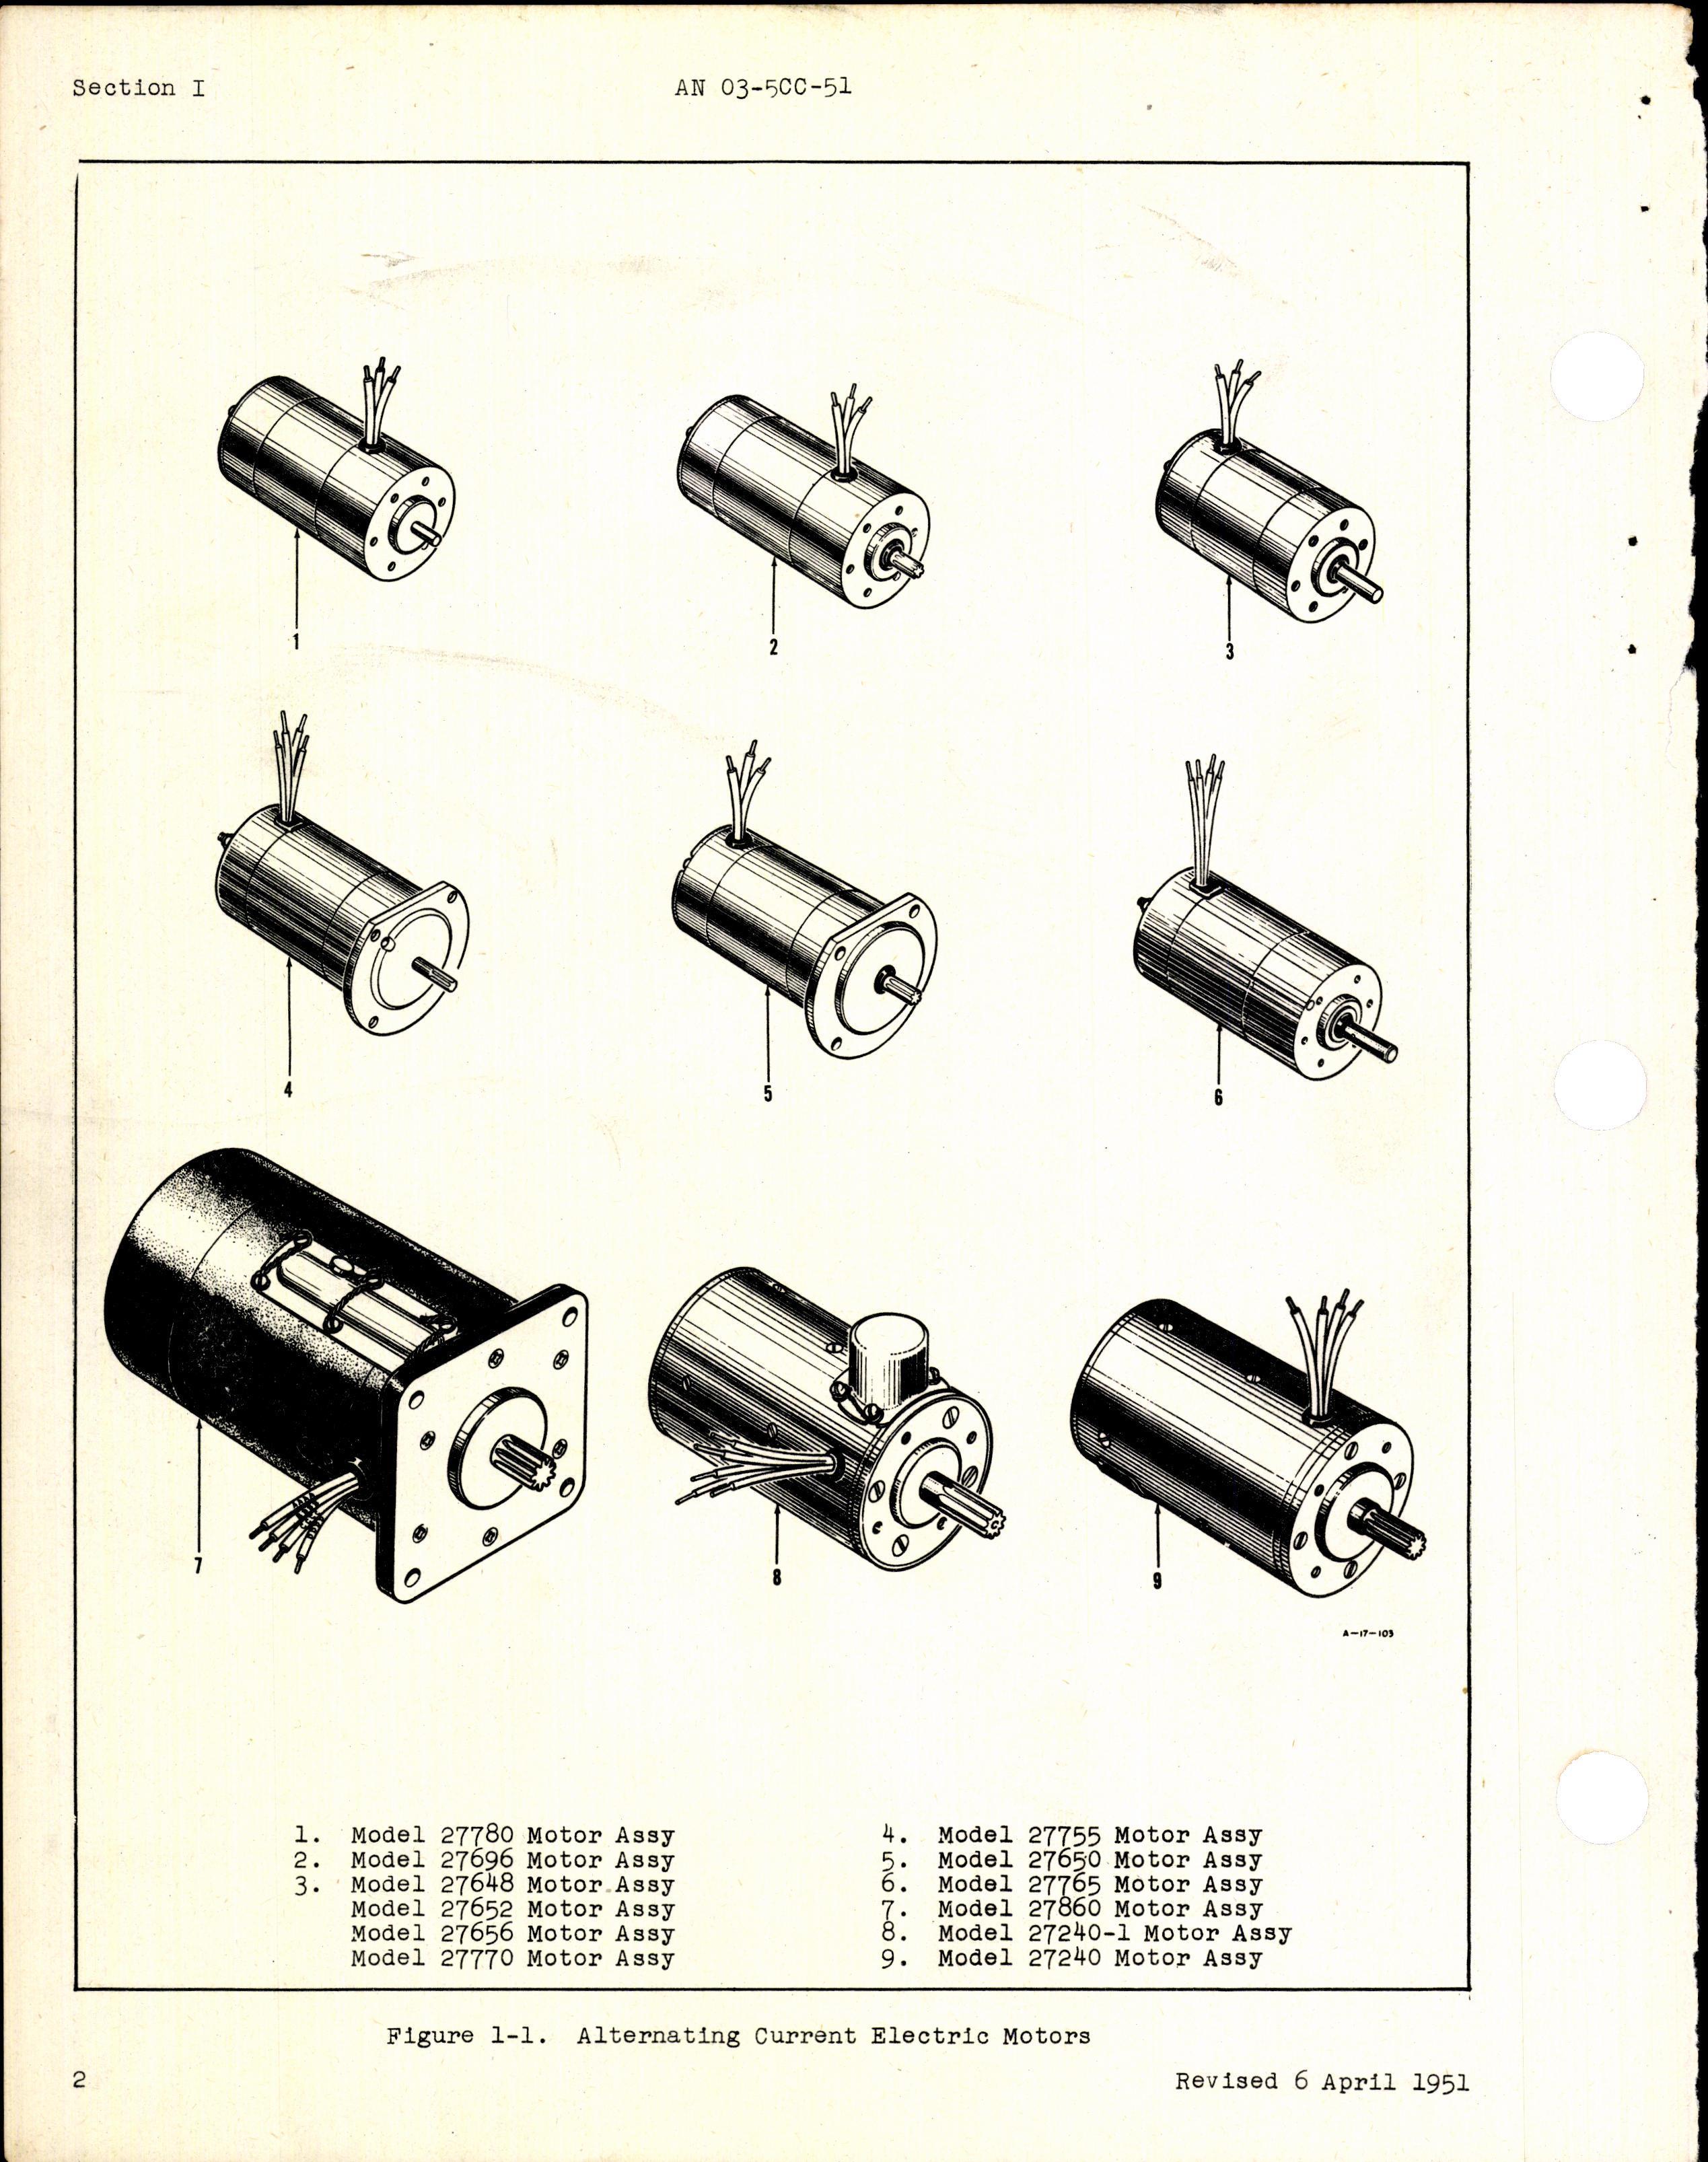 Sample page 4 from AirCorps Library document: Overhaul Instructions for Airesearch Electric Motors